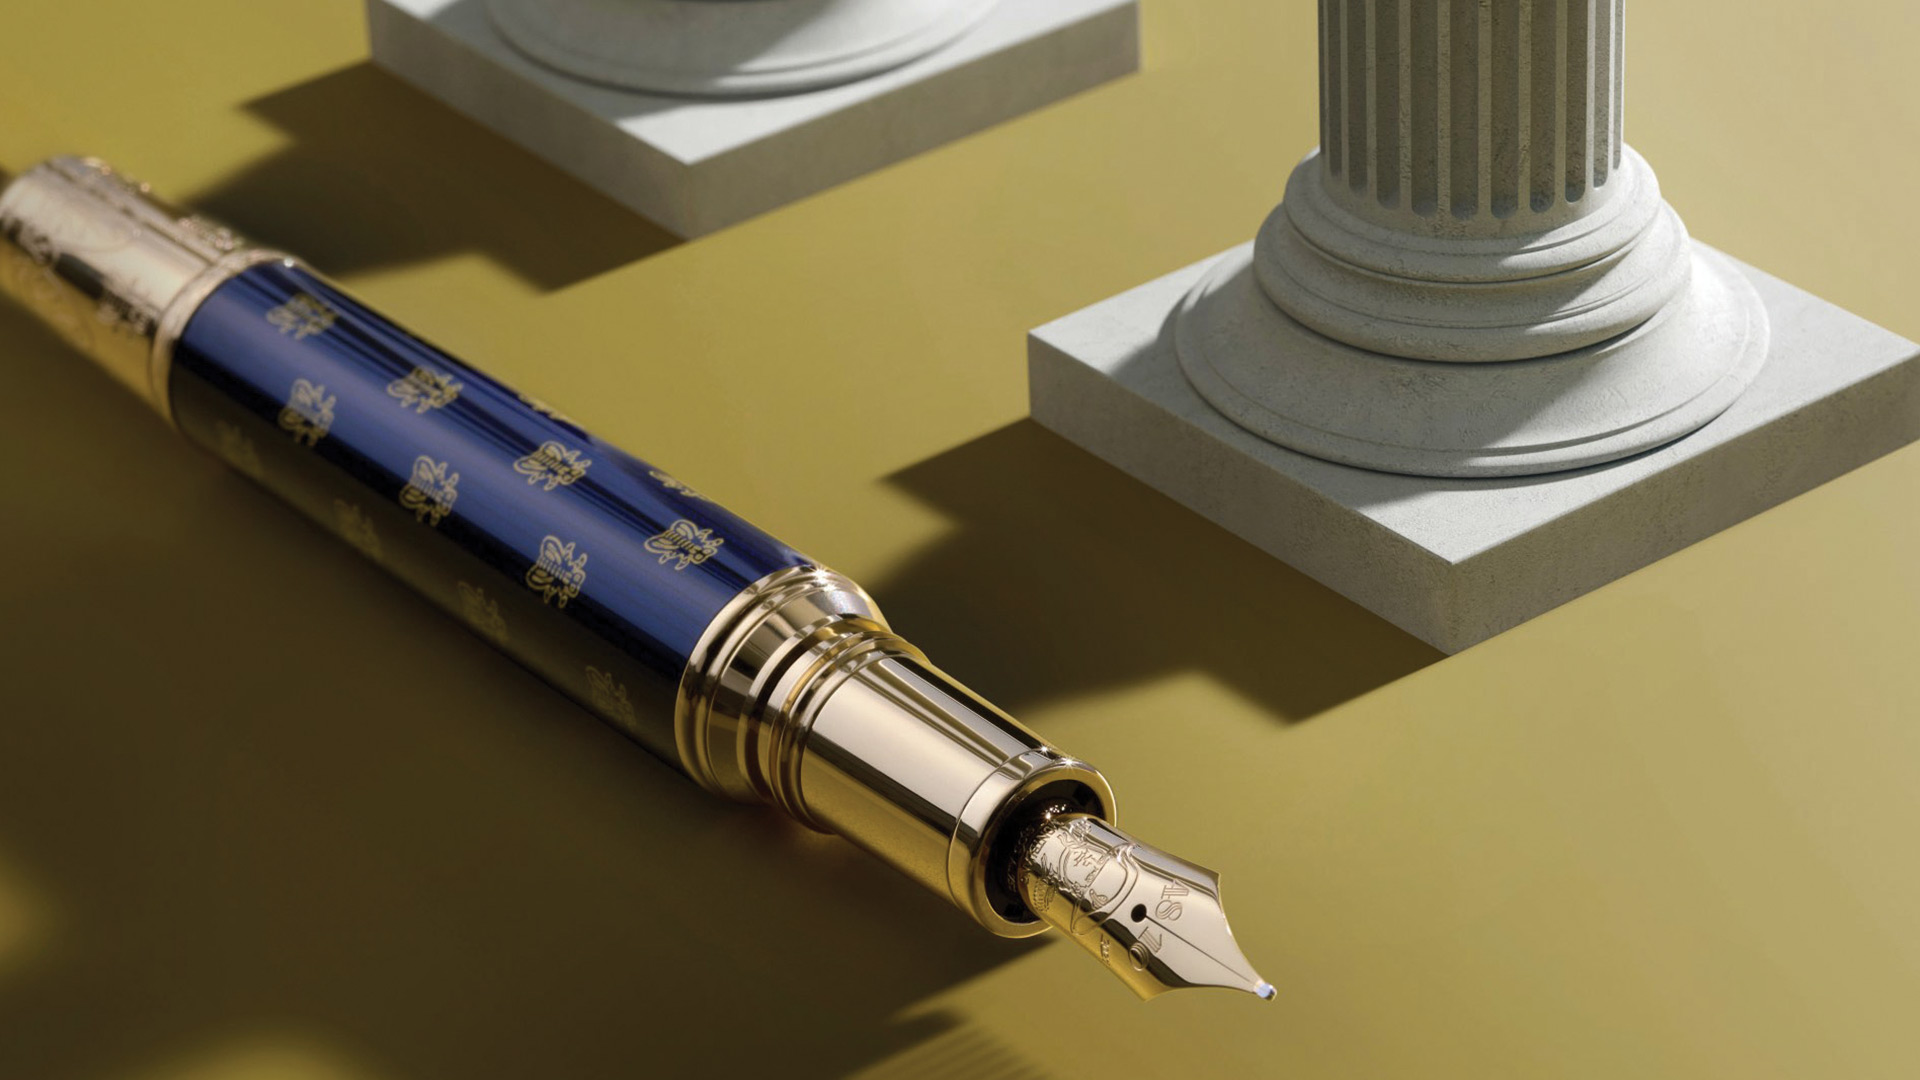 Find Out Why This Montblanc Pen Is Worth NZ$300,000